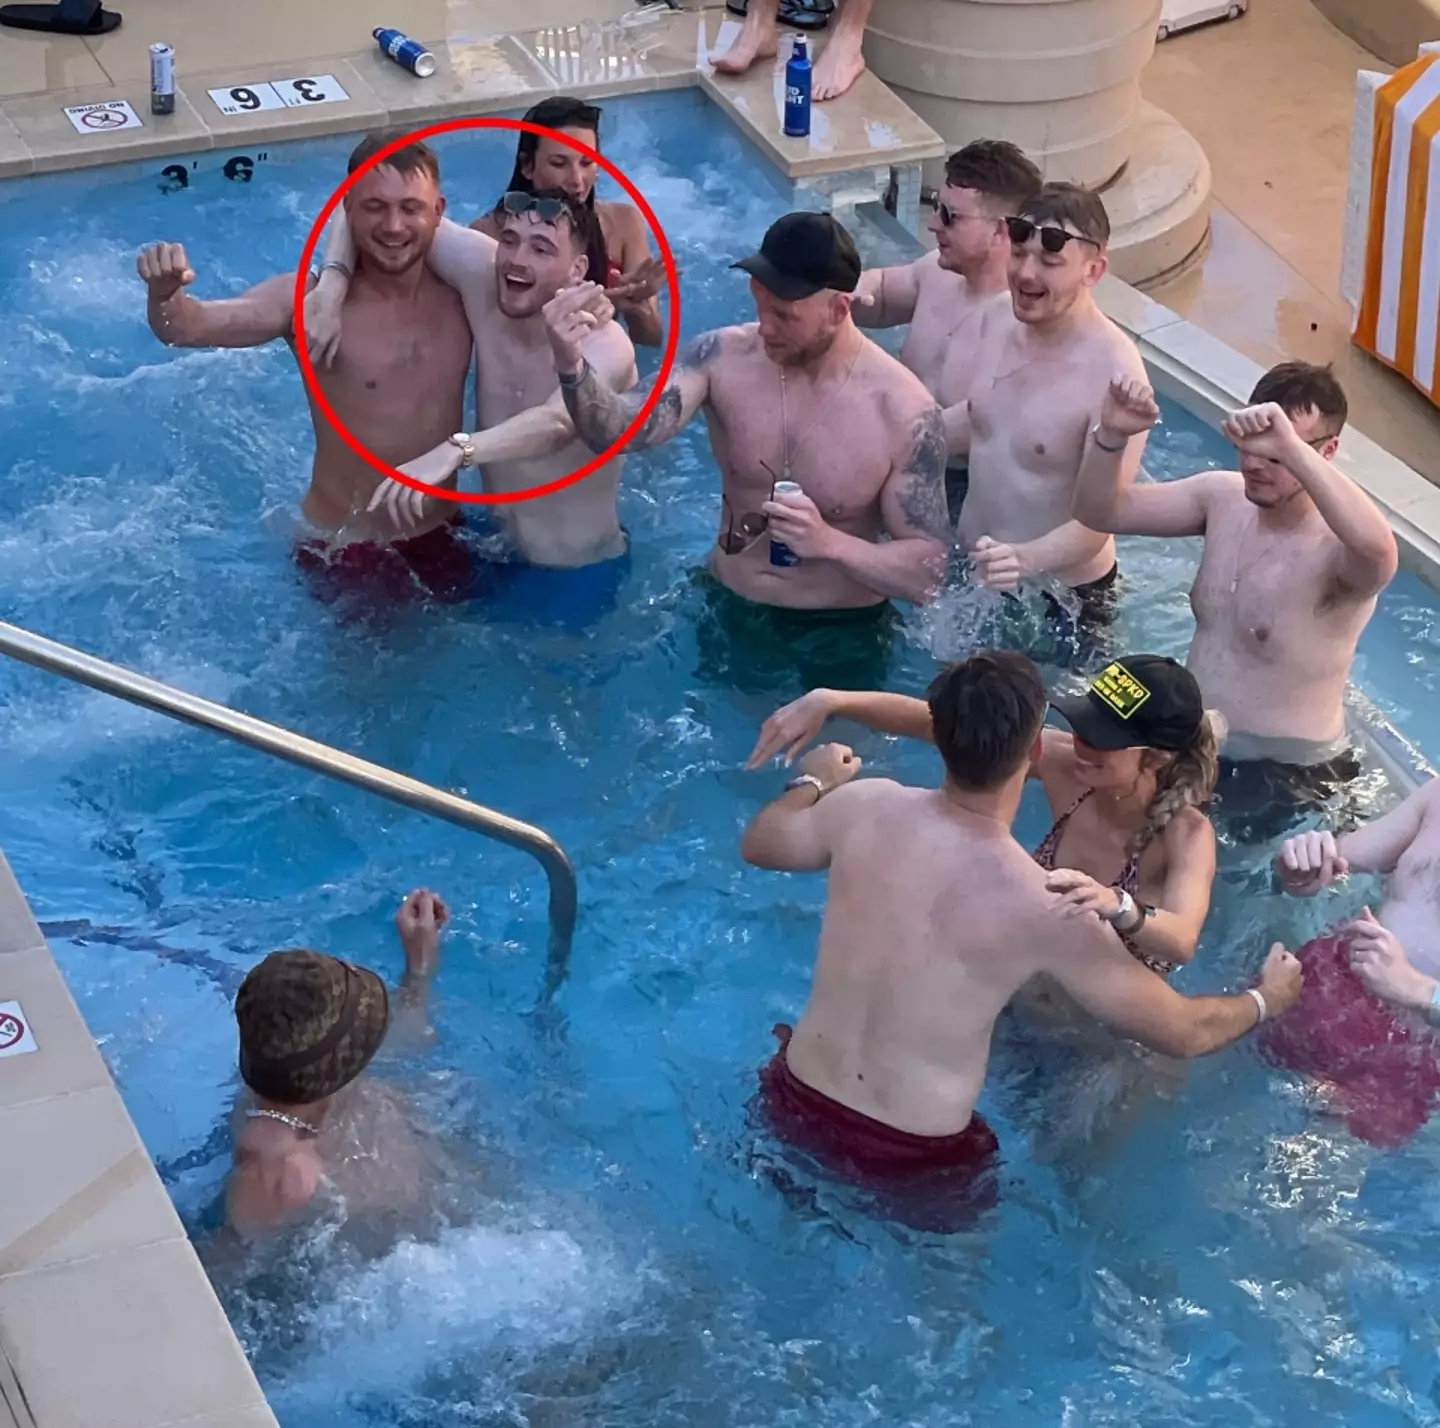 Liverpool's Andy Robertson on holiday in Las Vegas. MEGA / The Sun